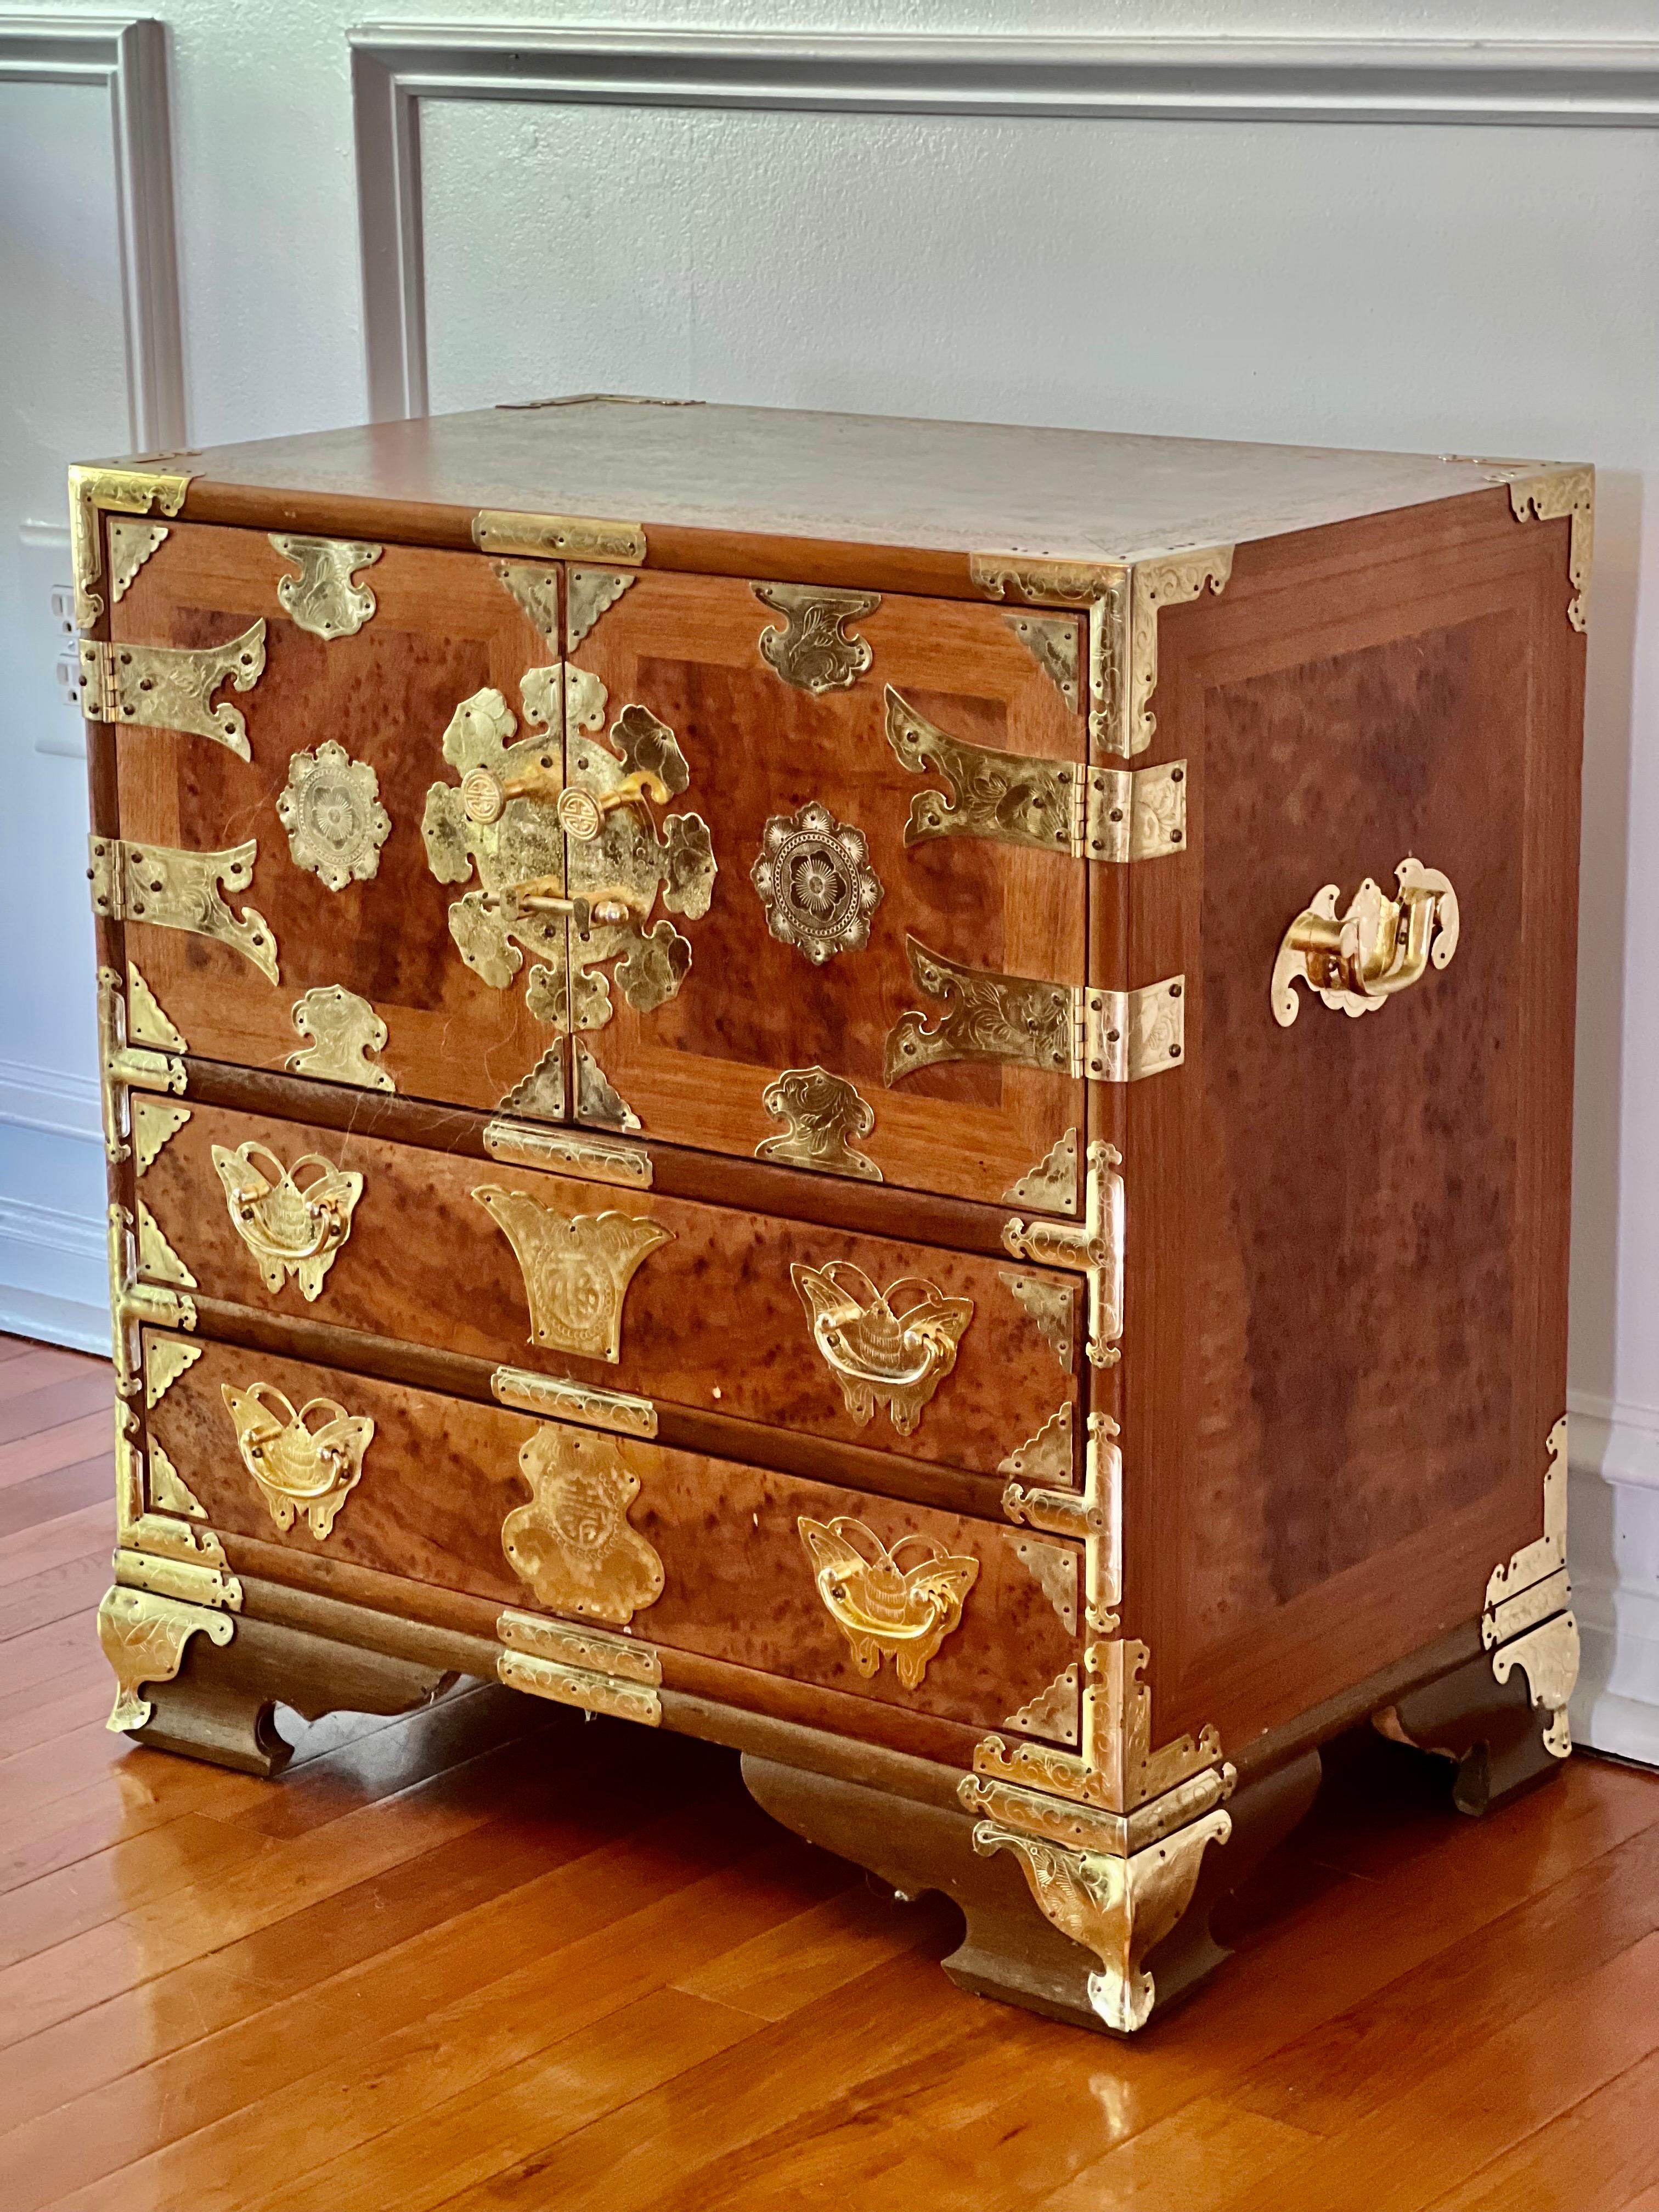 Beautiful Korean Camphorwood burl Bandaji style chest, c. 1960's. 

The chest features two internal small drawers and two full size lower drawers lined with red velvet. Gorgeous, oversized floral etched brass hardware adorn the piece throughout and